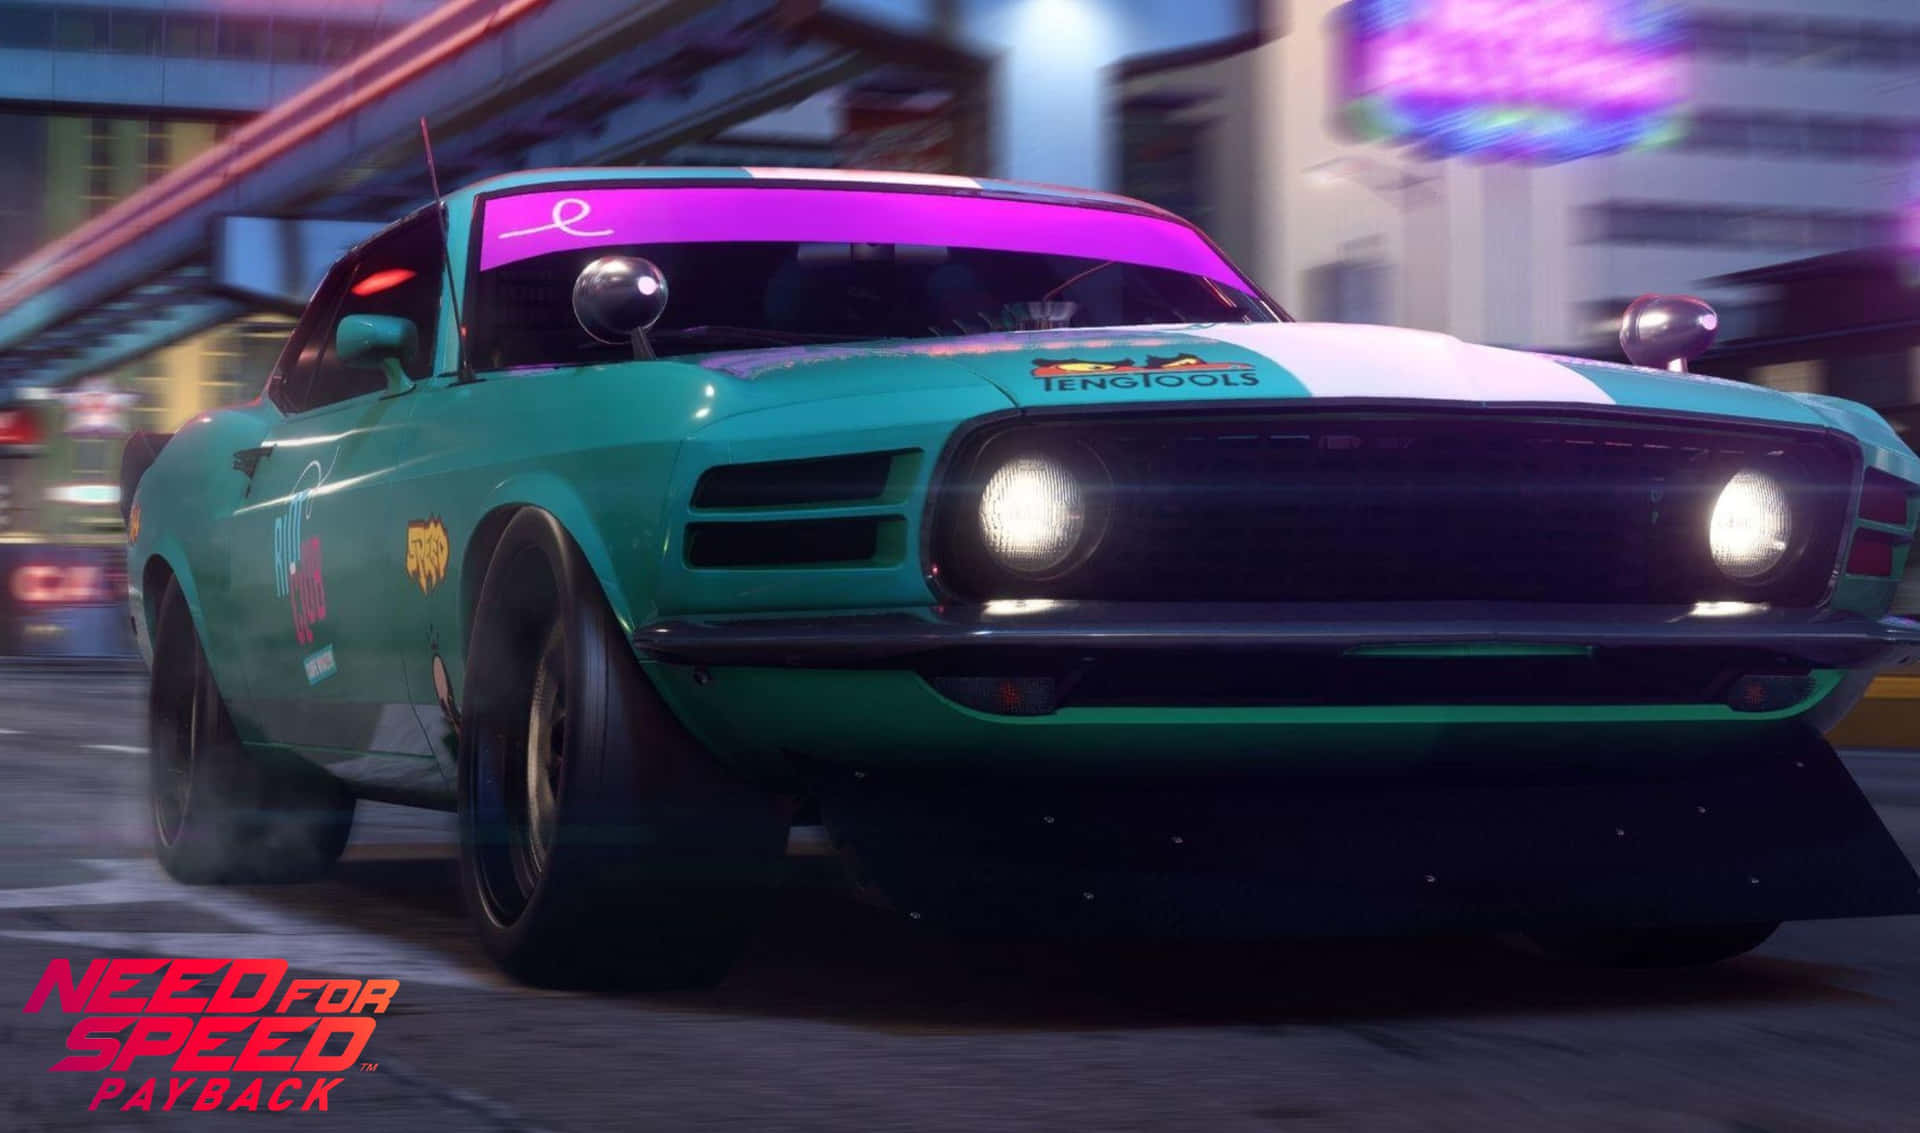 Outrun the Law in Need For Speed Payback